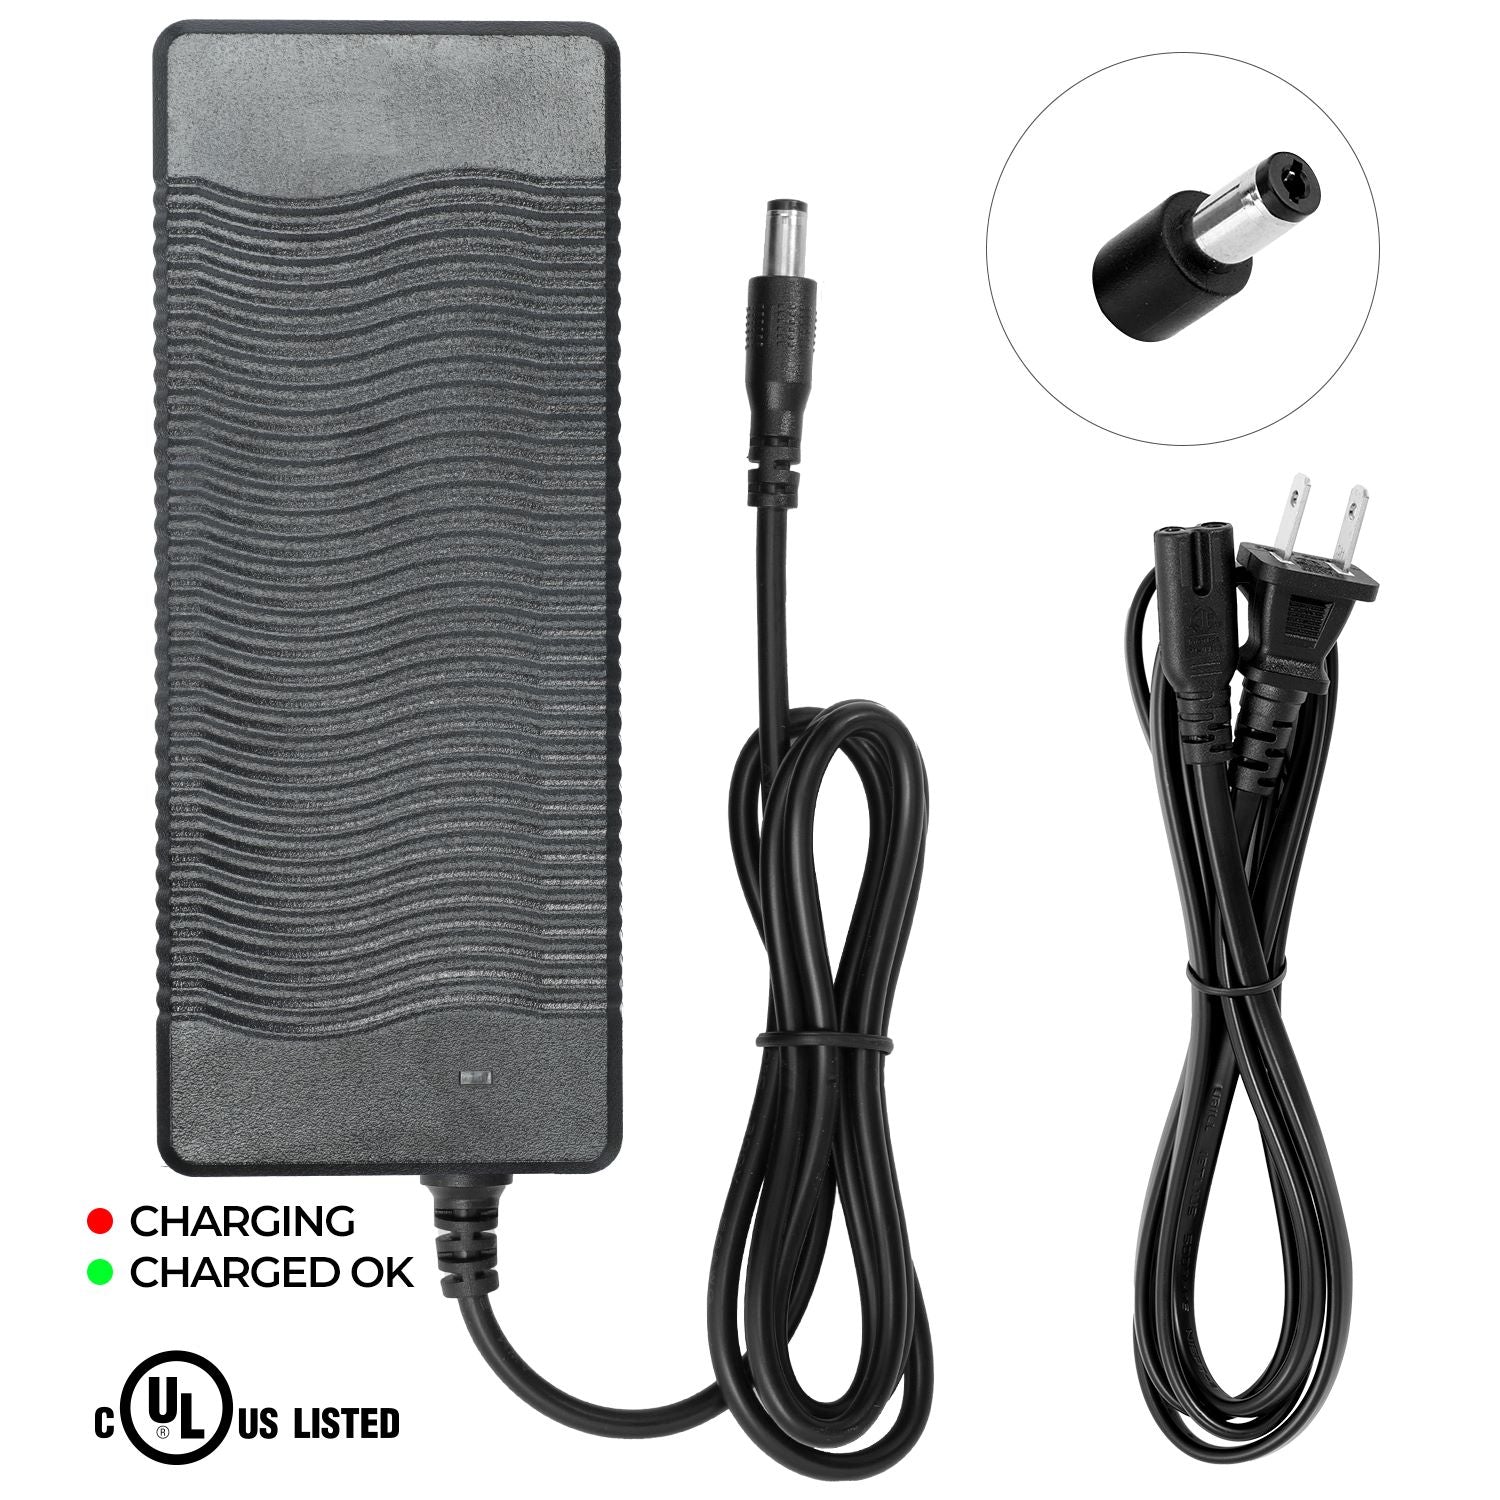 UL Listed Charger for Heybike (Please select the charger depending on your Bike Model)